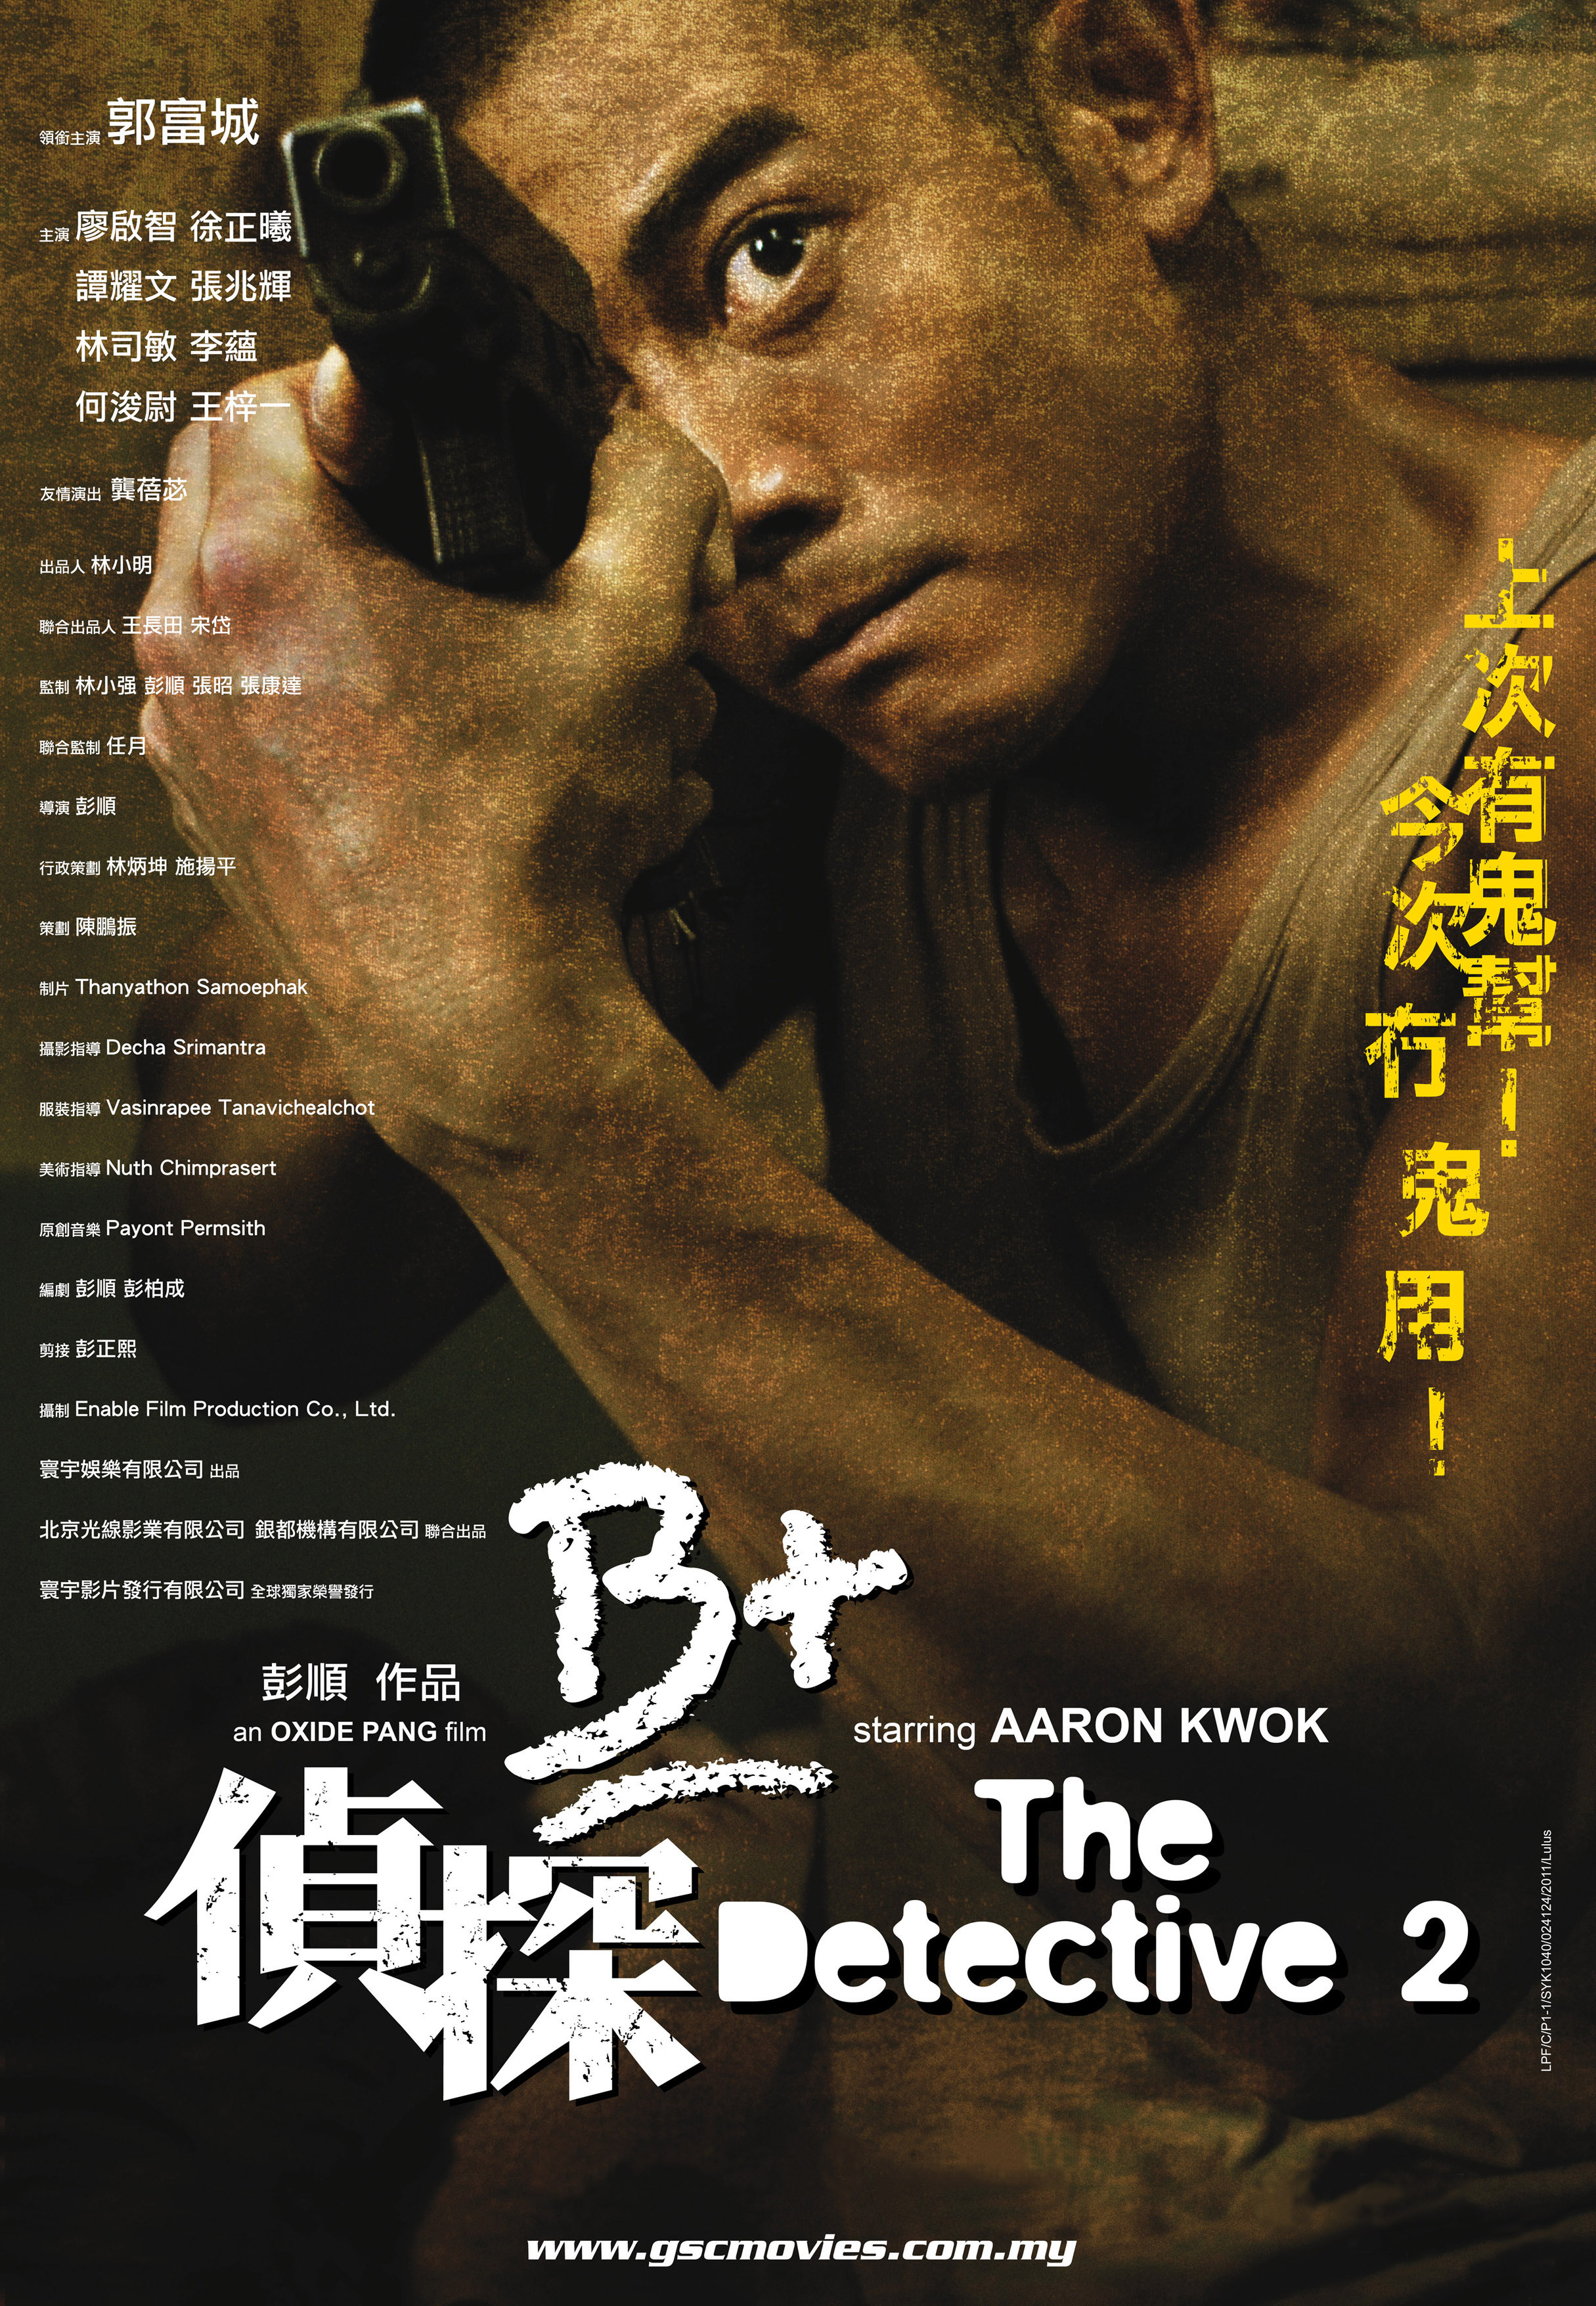 The Detective 2 Main Poster